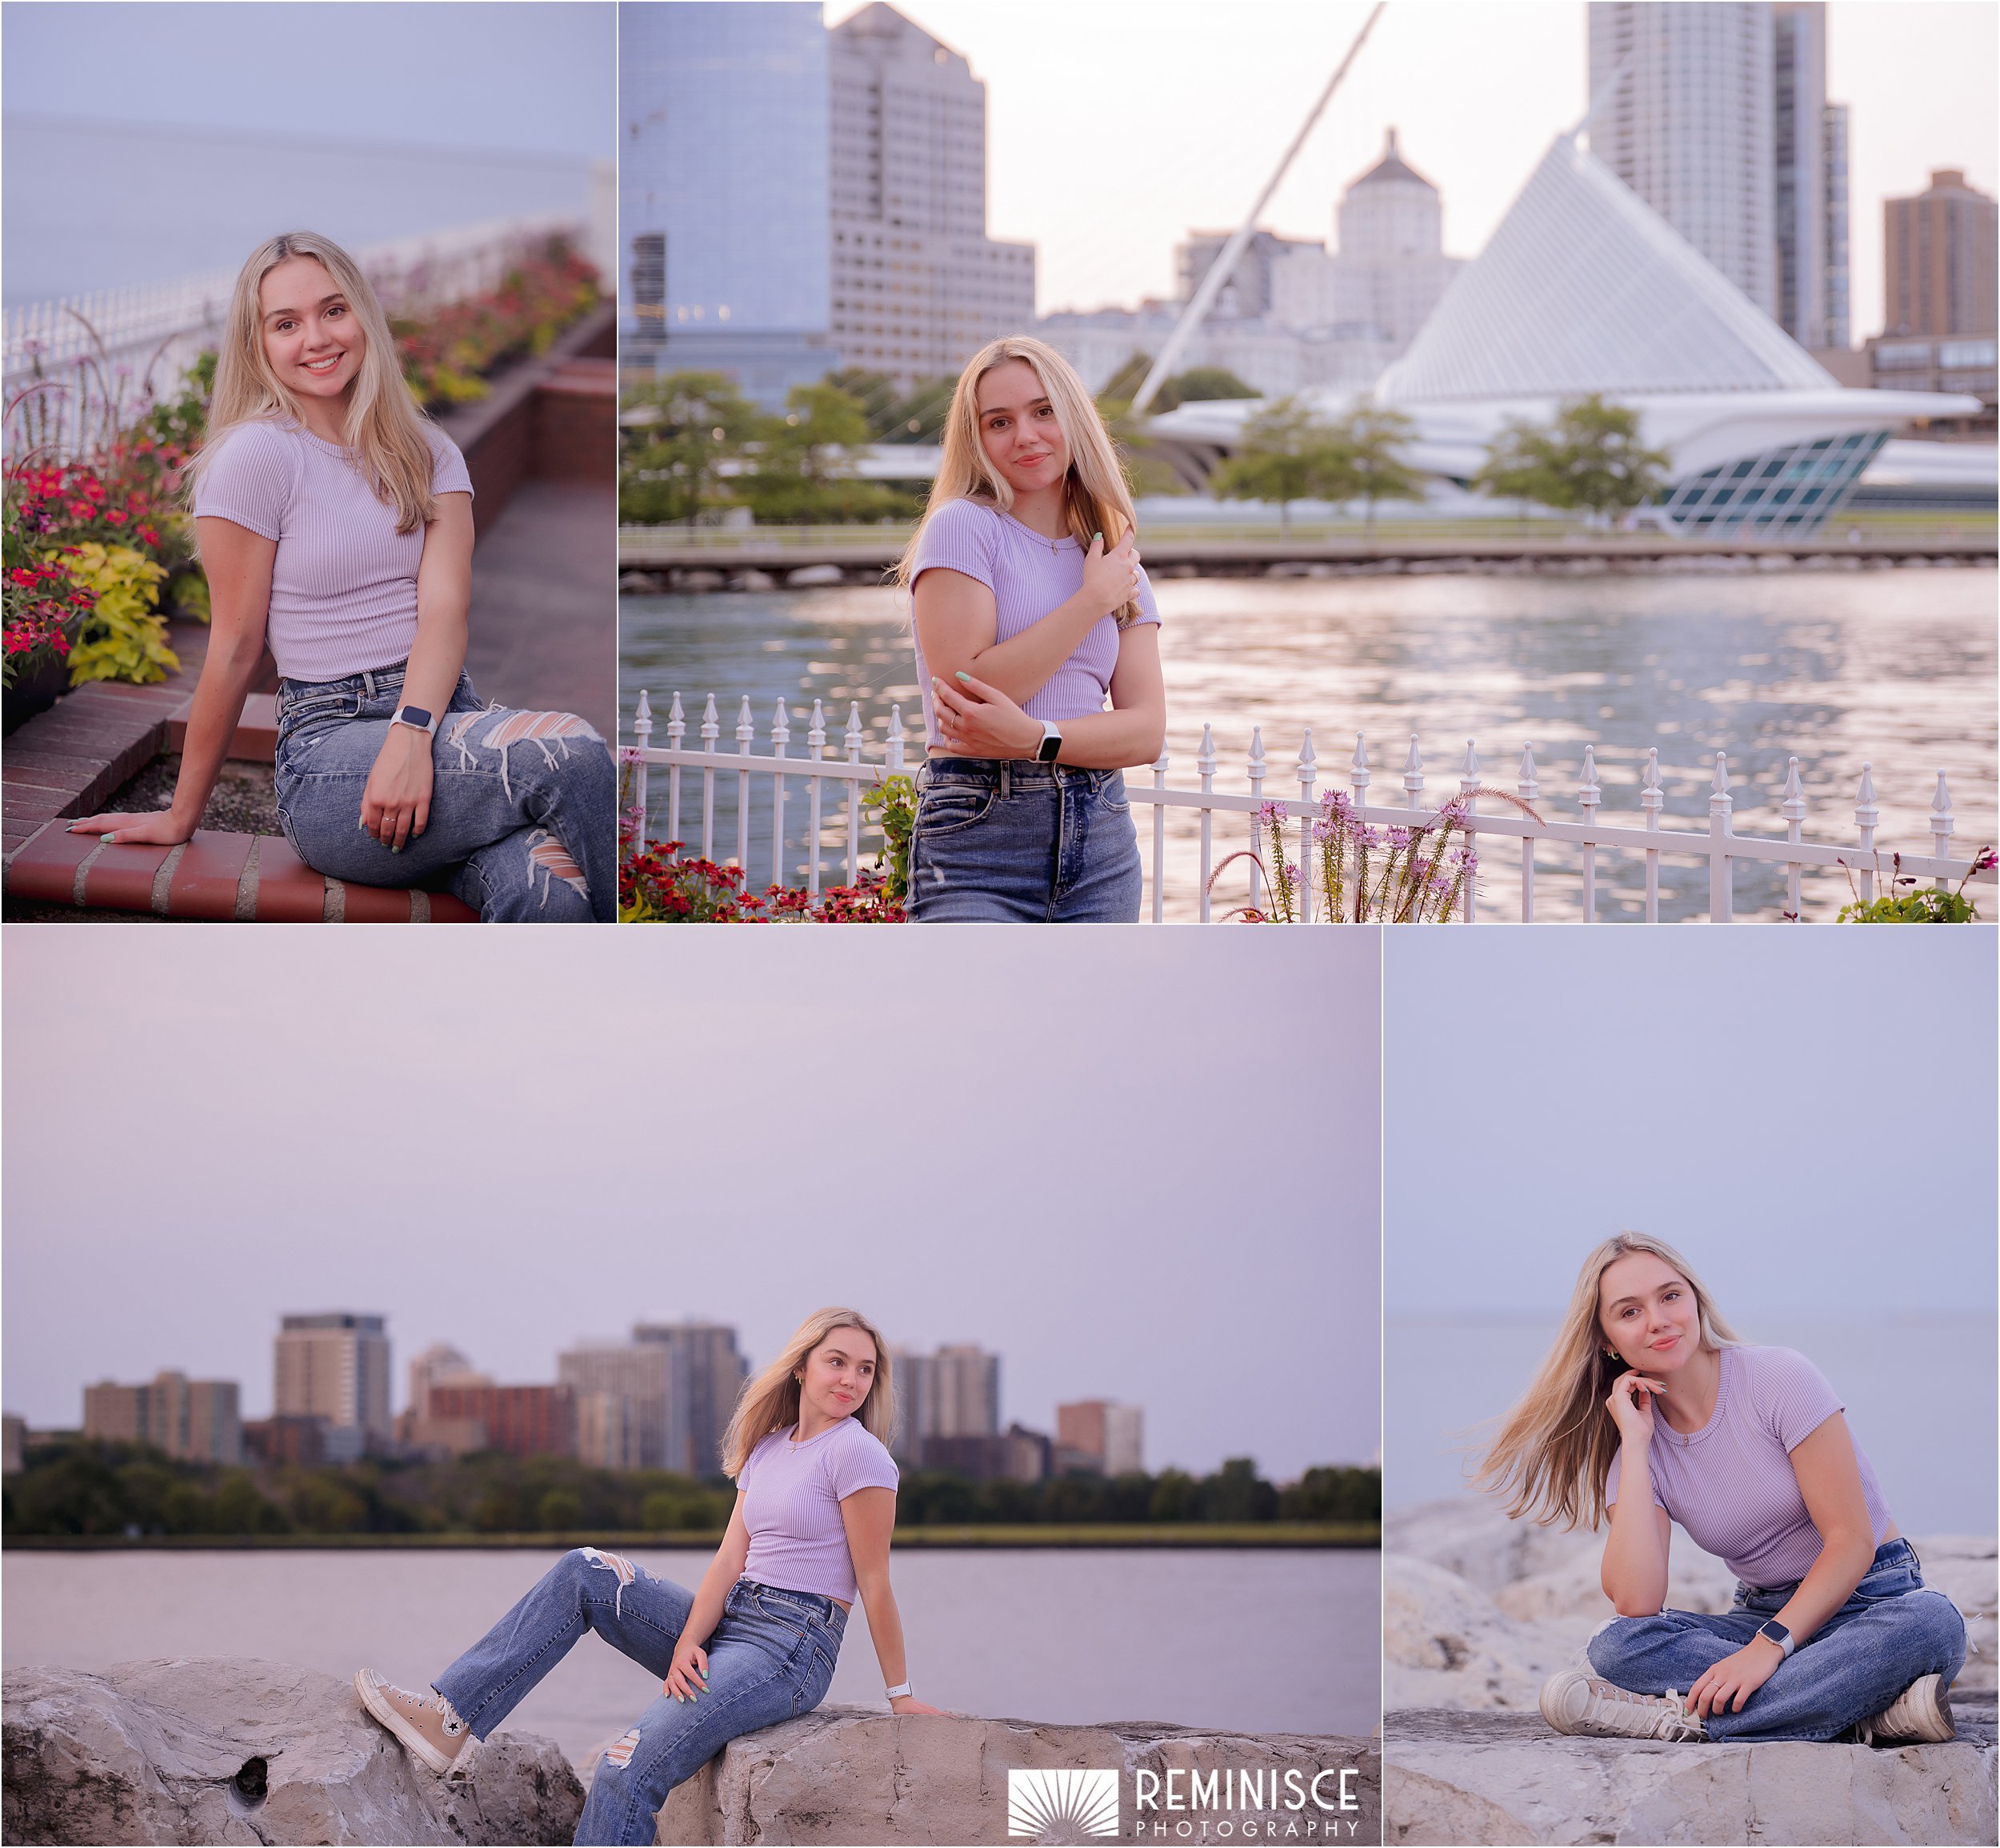 Best Milwaukee, Madison, and Chicago senior portrait photographer. Artistic and candid high school yearbook photography featuring graduation, downtown, nature, and the lakefront in photoshoot sessions without drape. Boy, girl, and non binary senior photos.